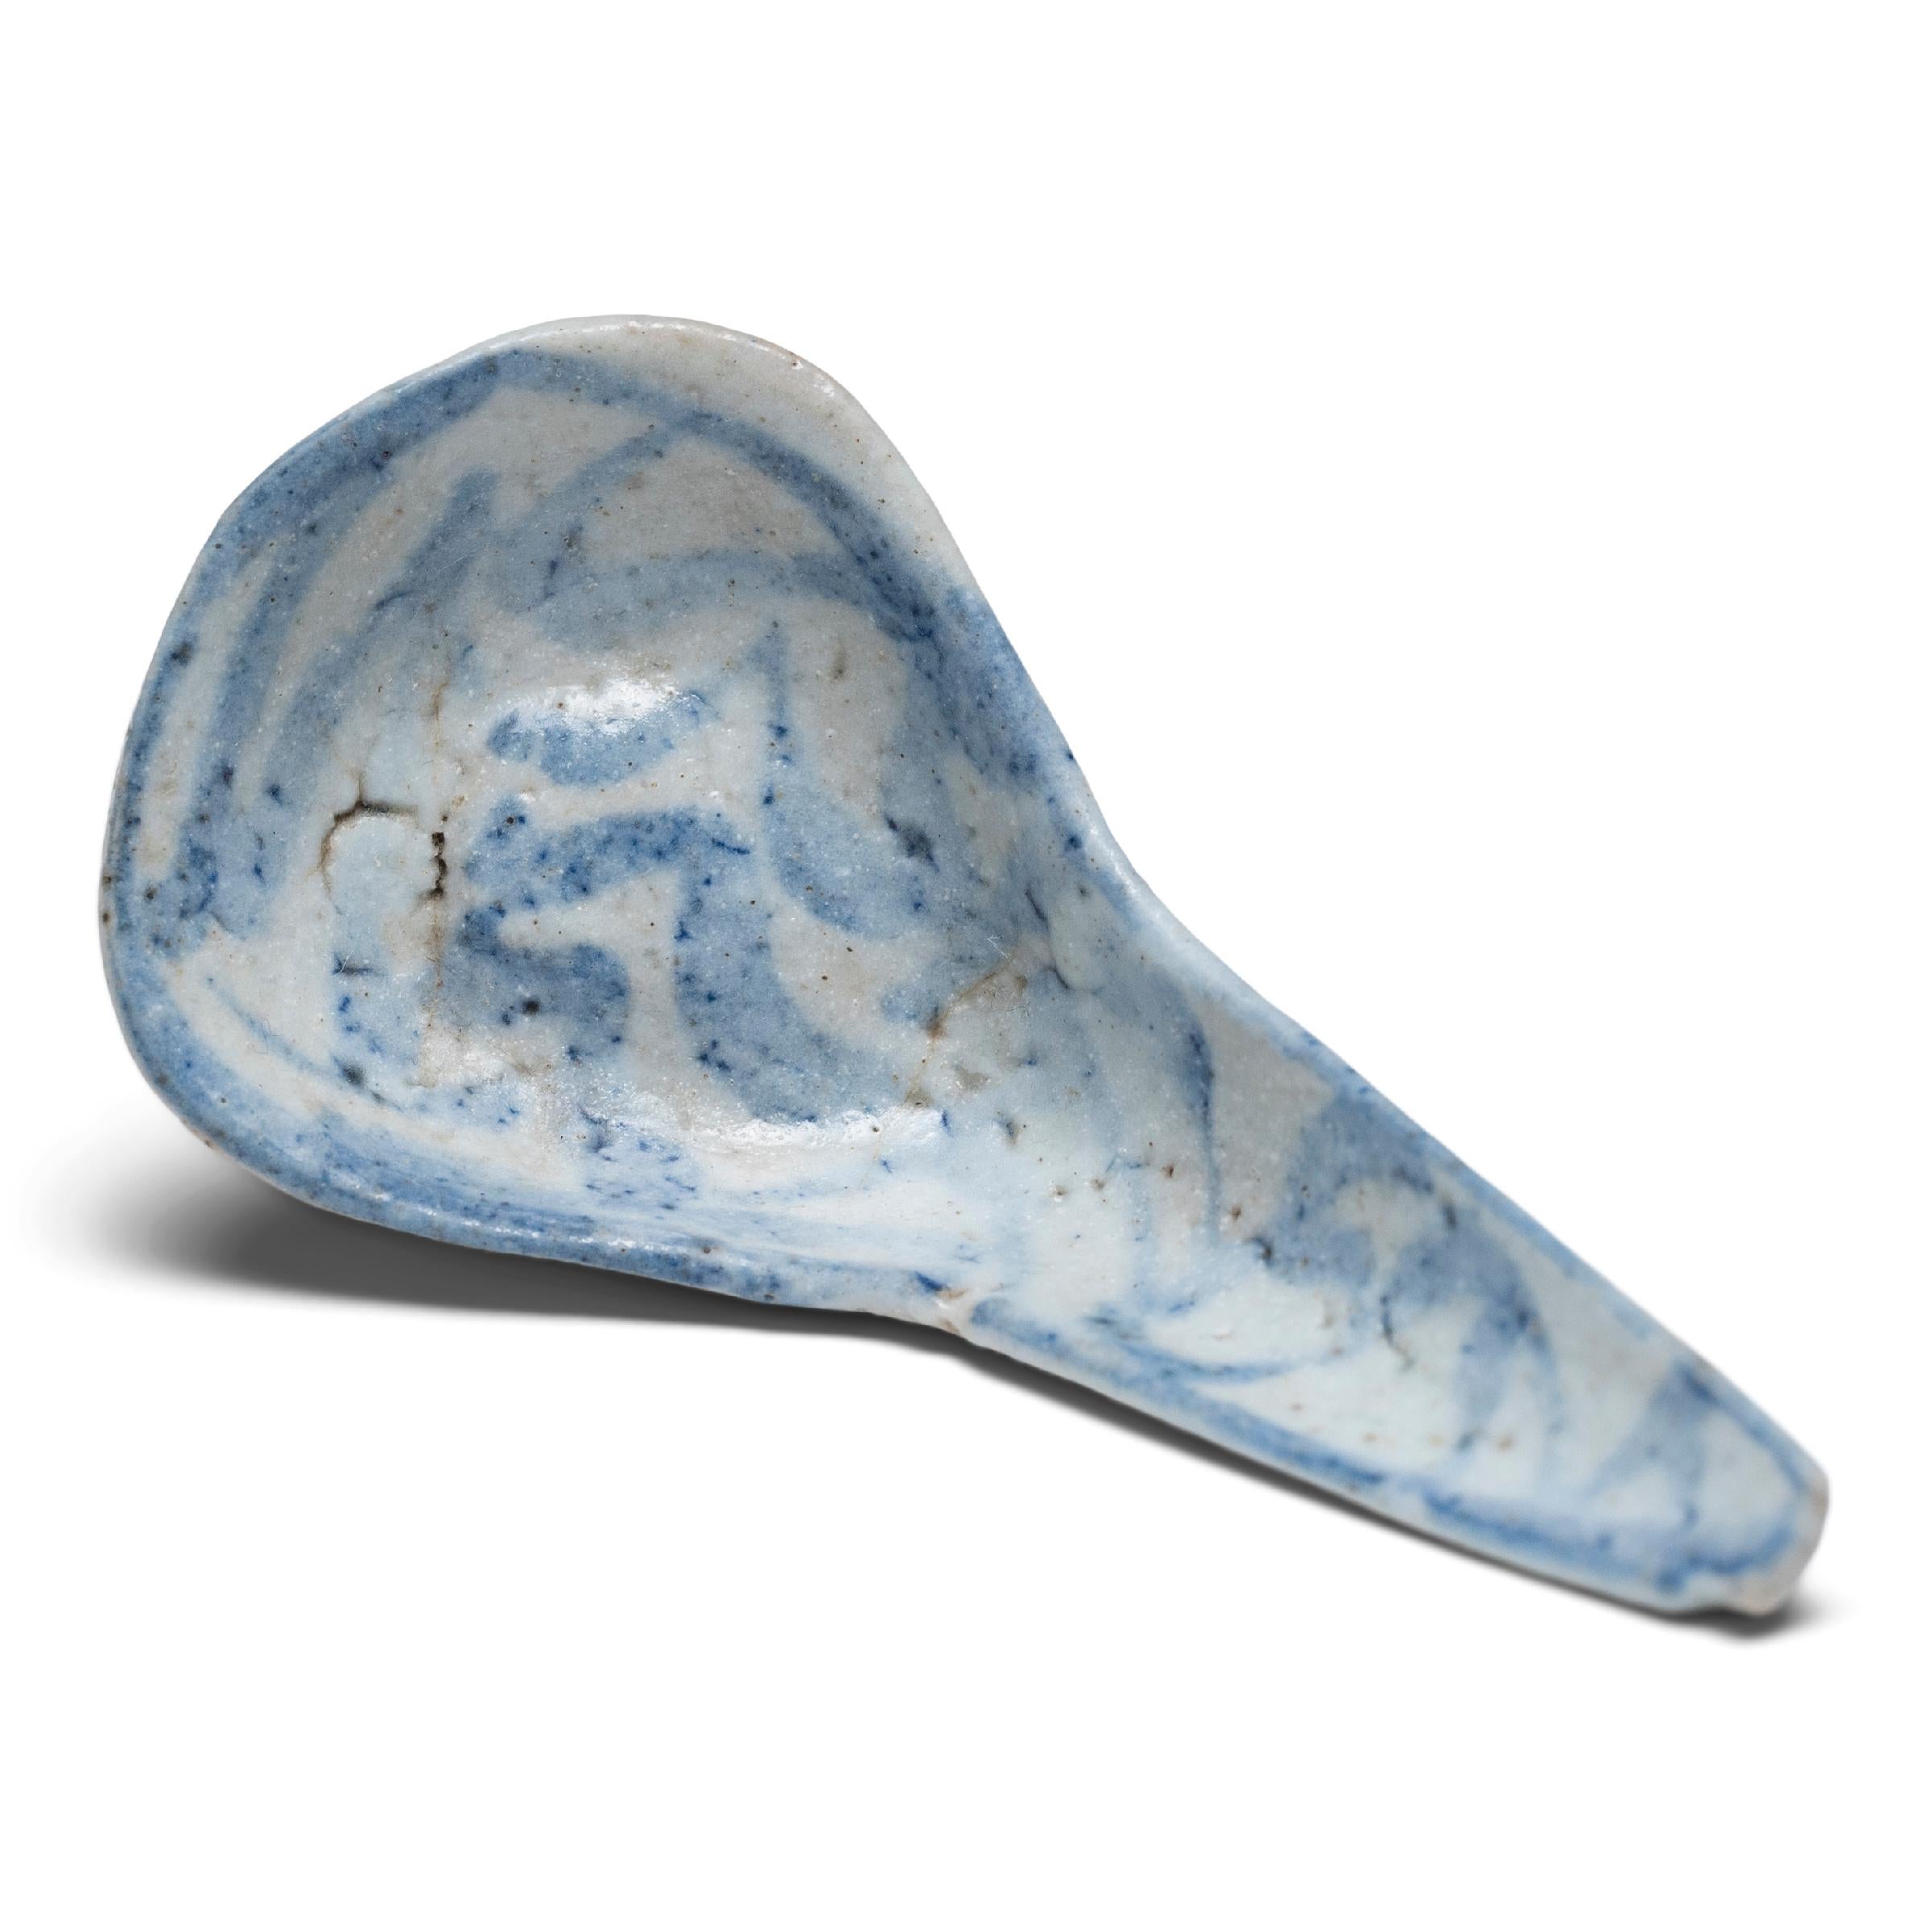 A delicate example of the time-honored practice of blue-and-white ceramics, this 19th-century porcelain soup spoon was likely used as an everyday eating utensil. Used in China as early as the Shang dynasty (1600 - 1046 B.C.), spoons predated